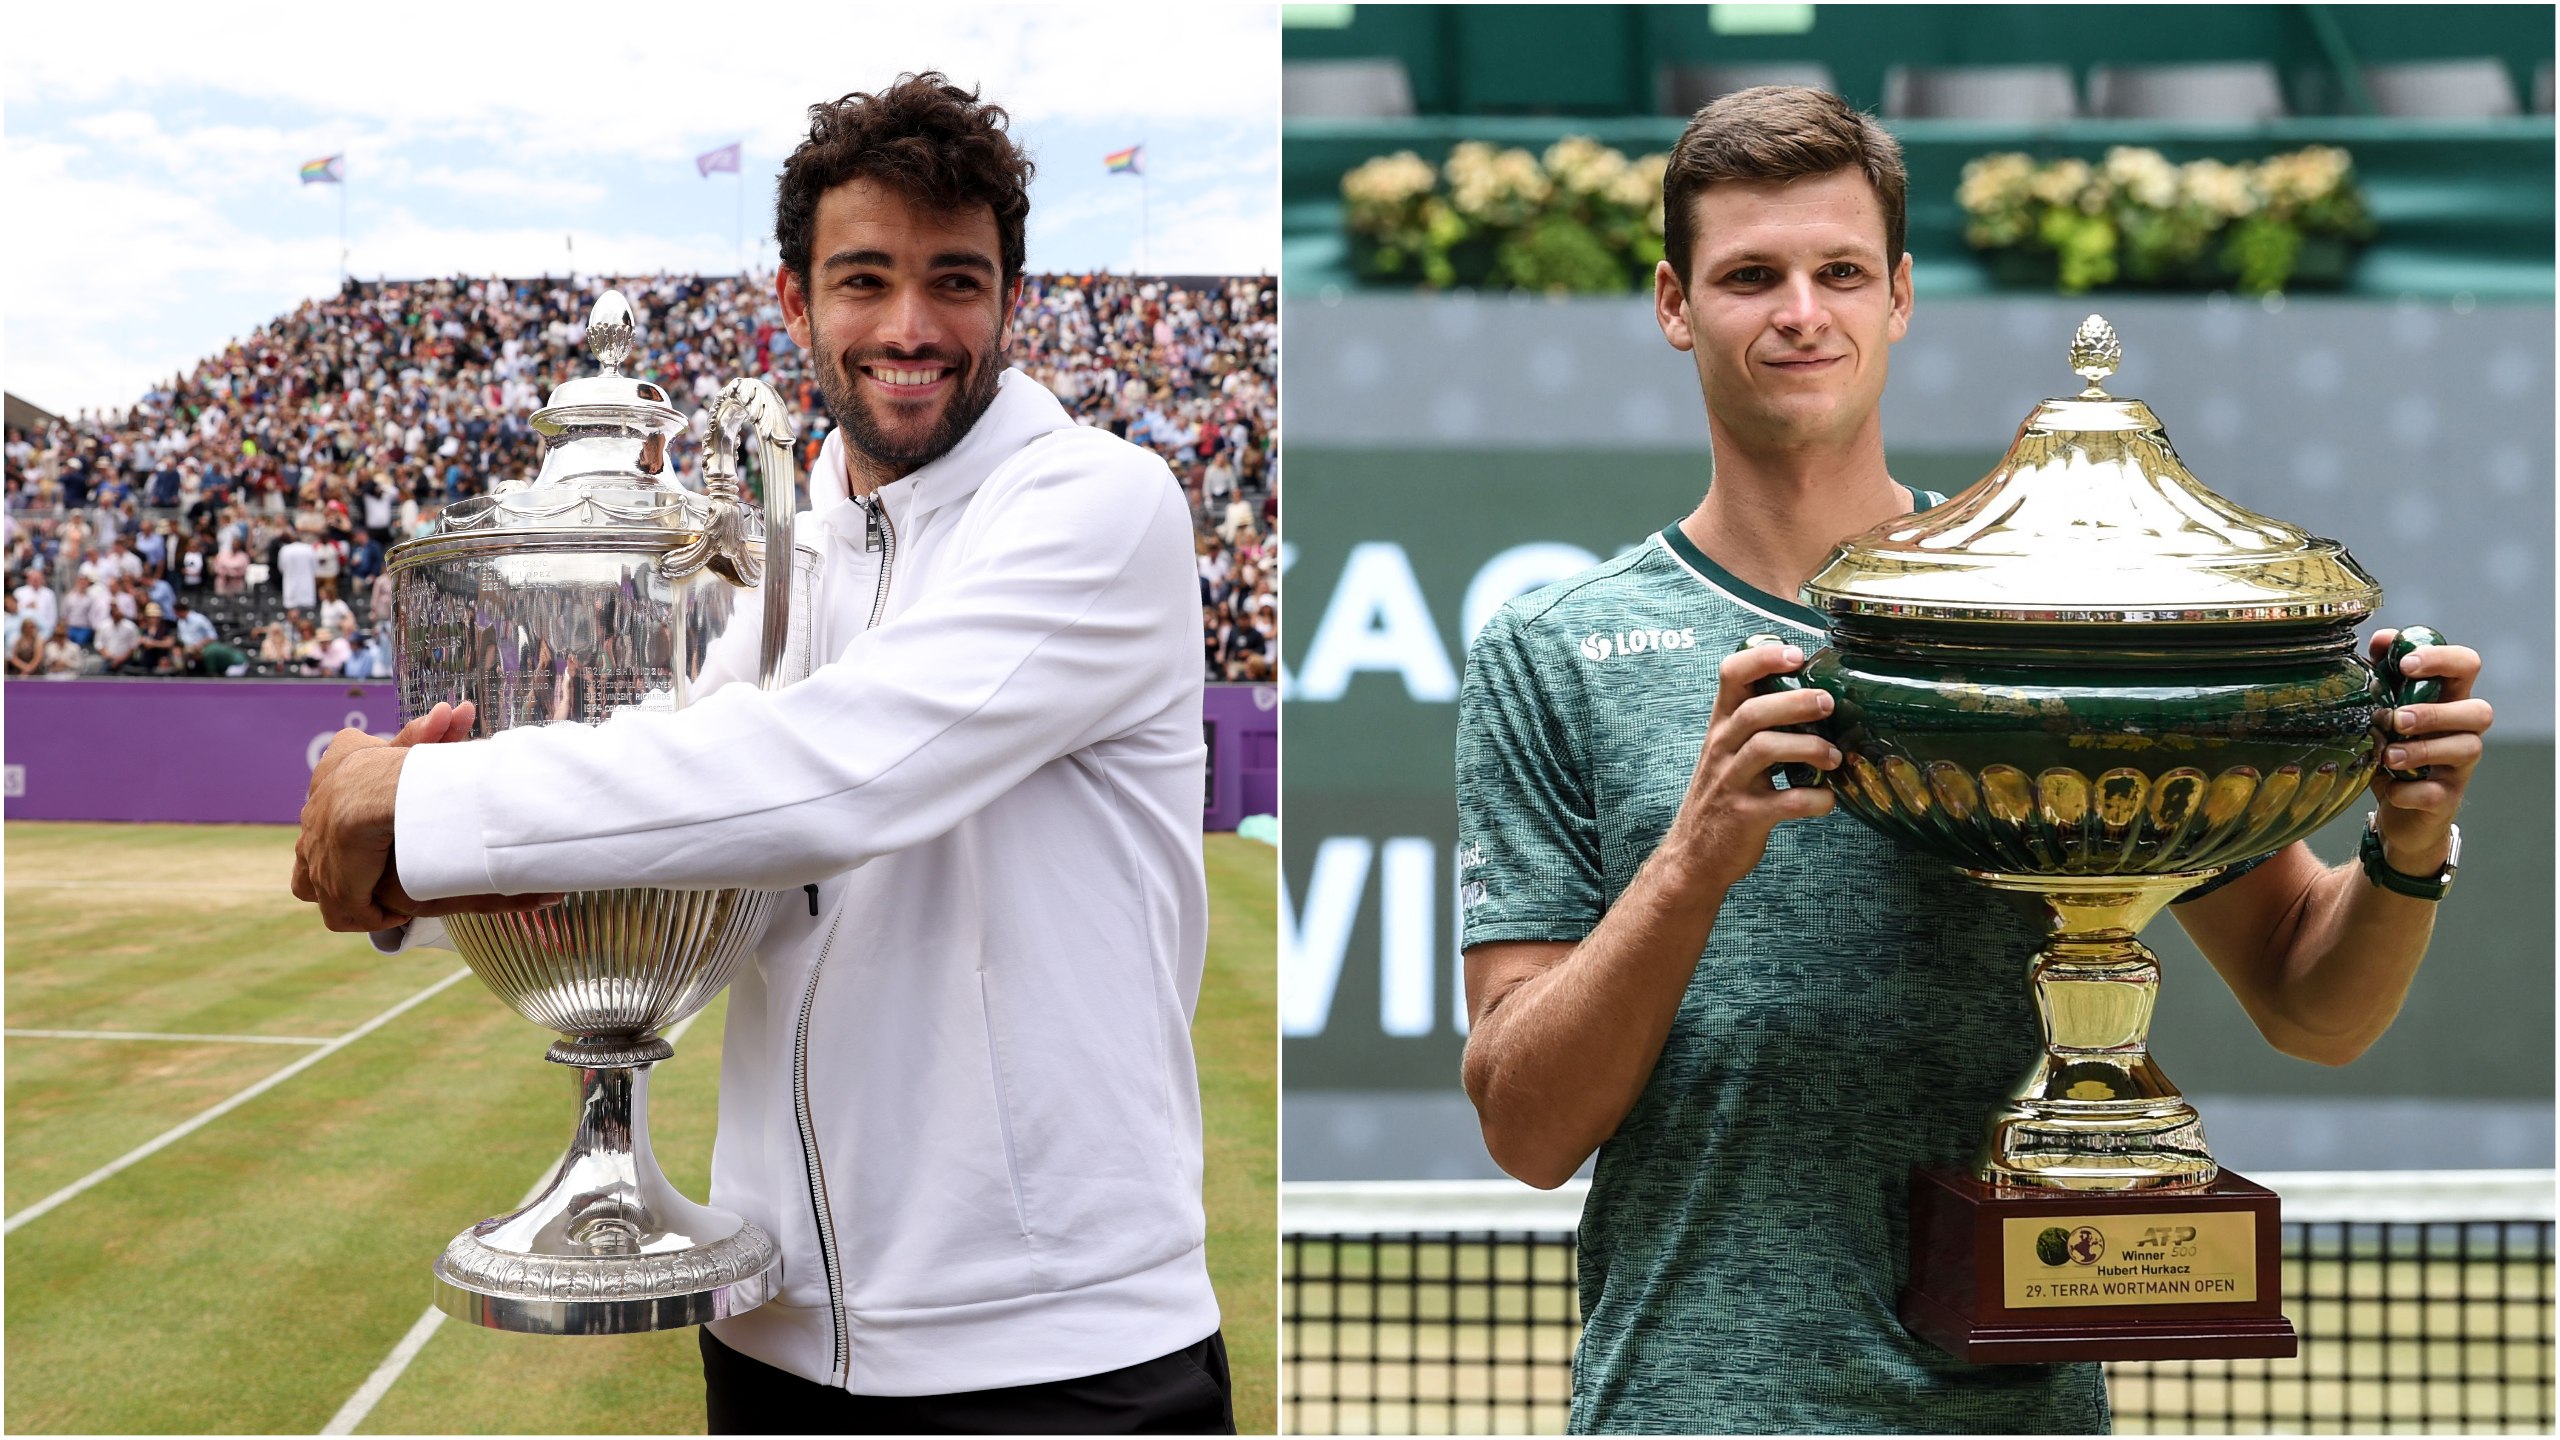 Matteo Berrettini, Hubert Hurkacz claim London Queens and Halle titles within seconds of each other